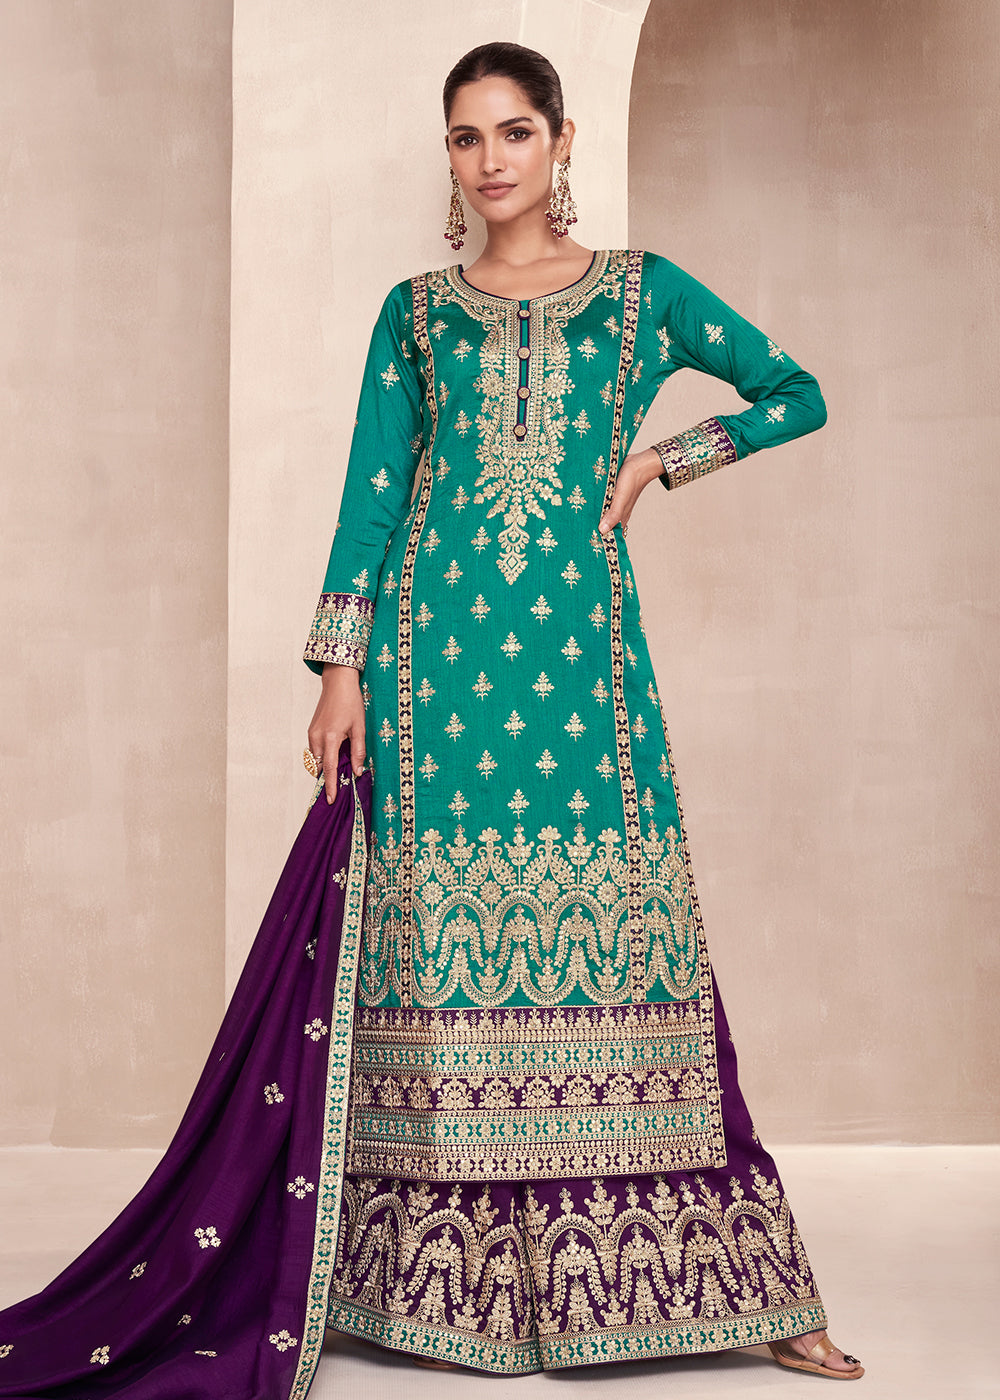 Buy Now Teal Embroidered Premium Silk Palazzo Suit with Blue Dupatta Online in USA, UK, Canada, Germany, Australia & Worldwide at Empress Clothing.